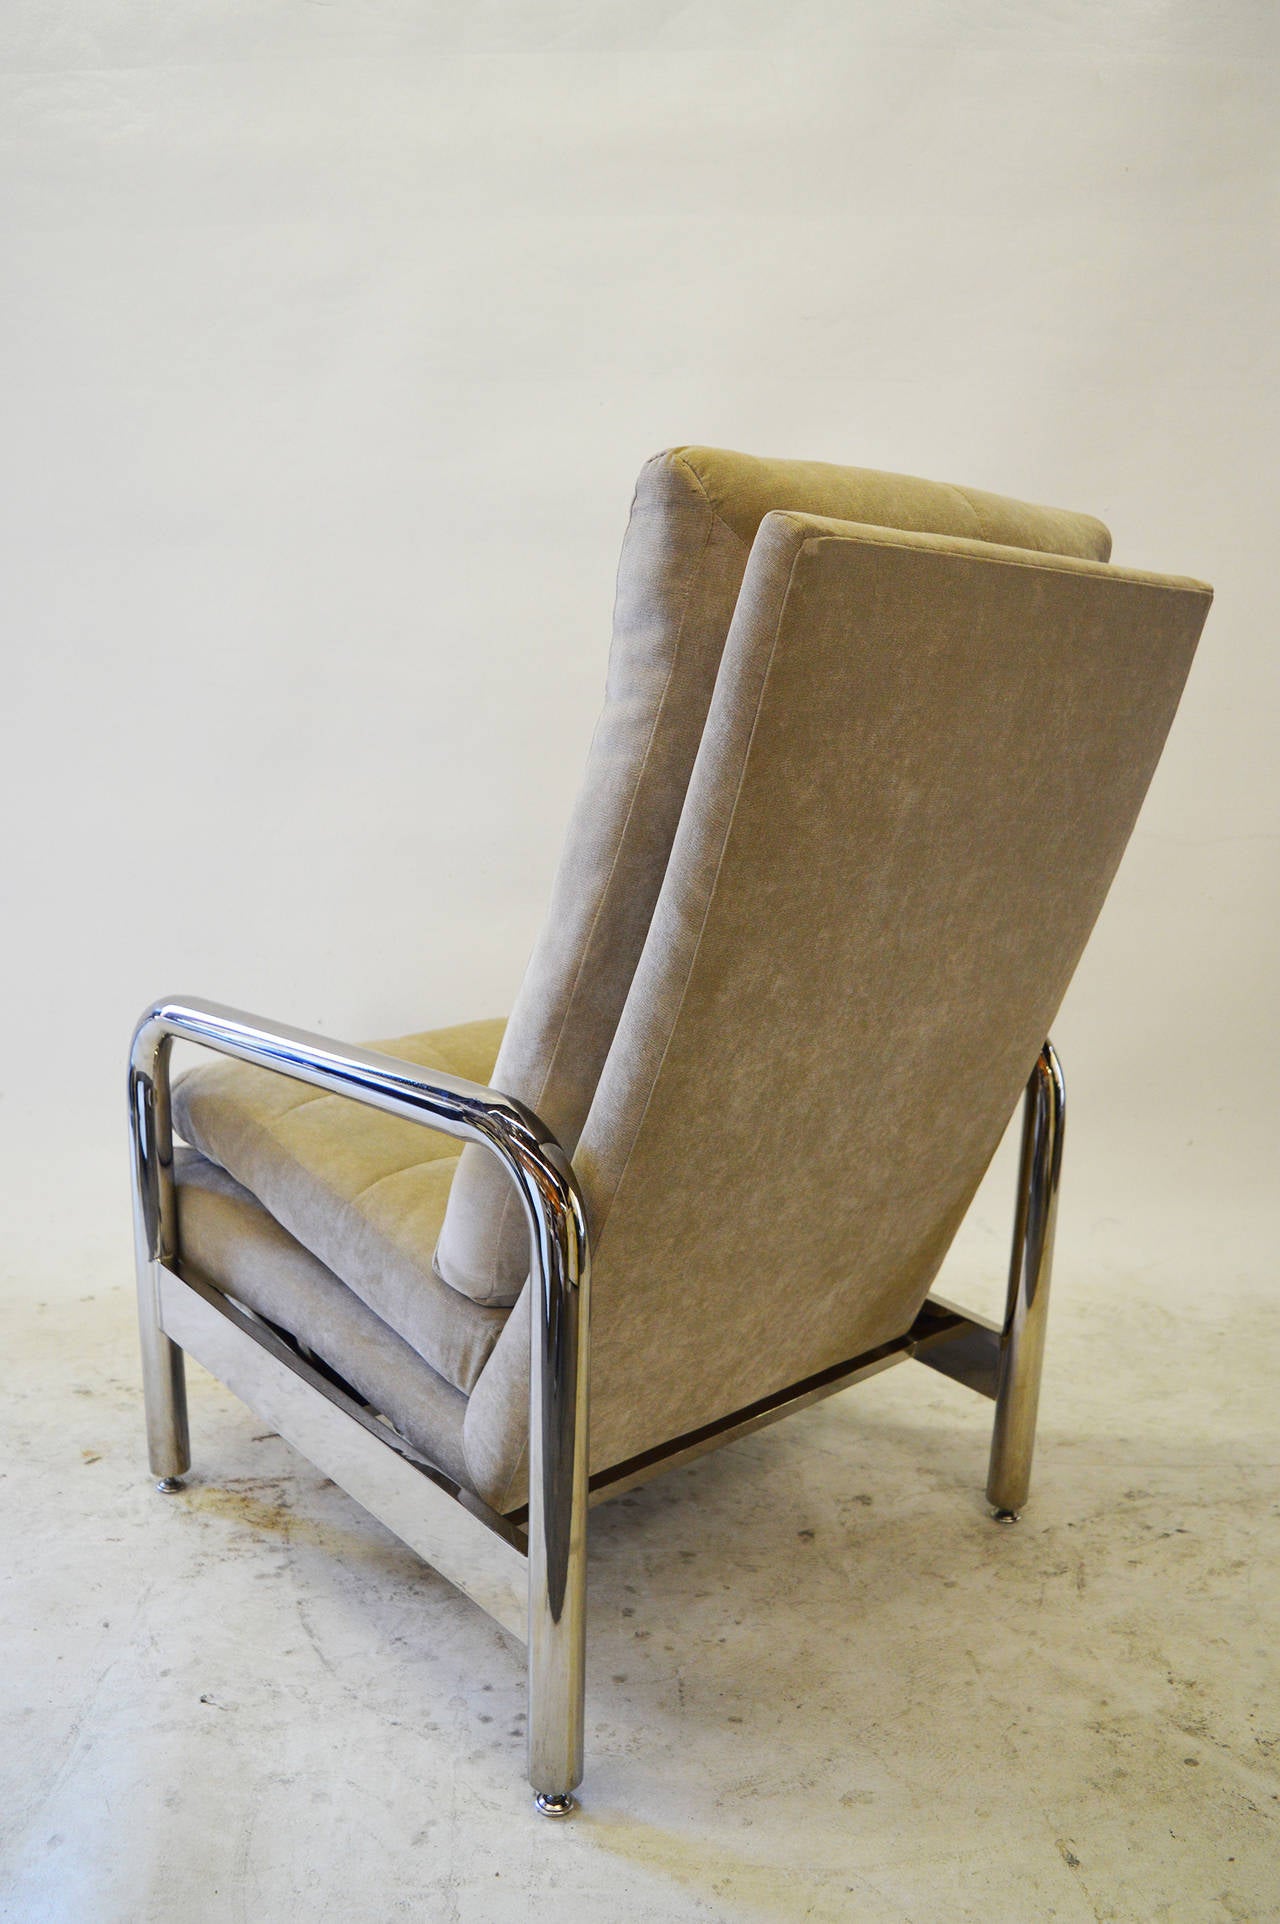 Plated Chrome Recliner by Milo Baughman for Thayer Coggin